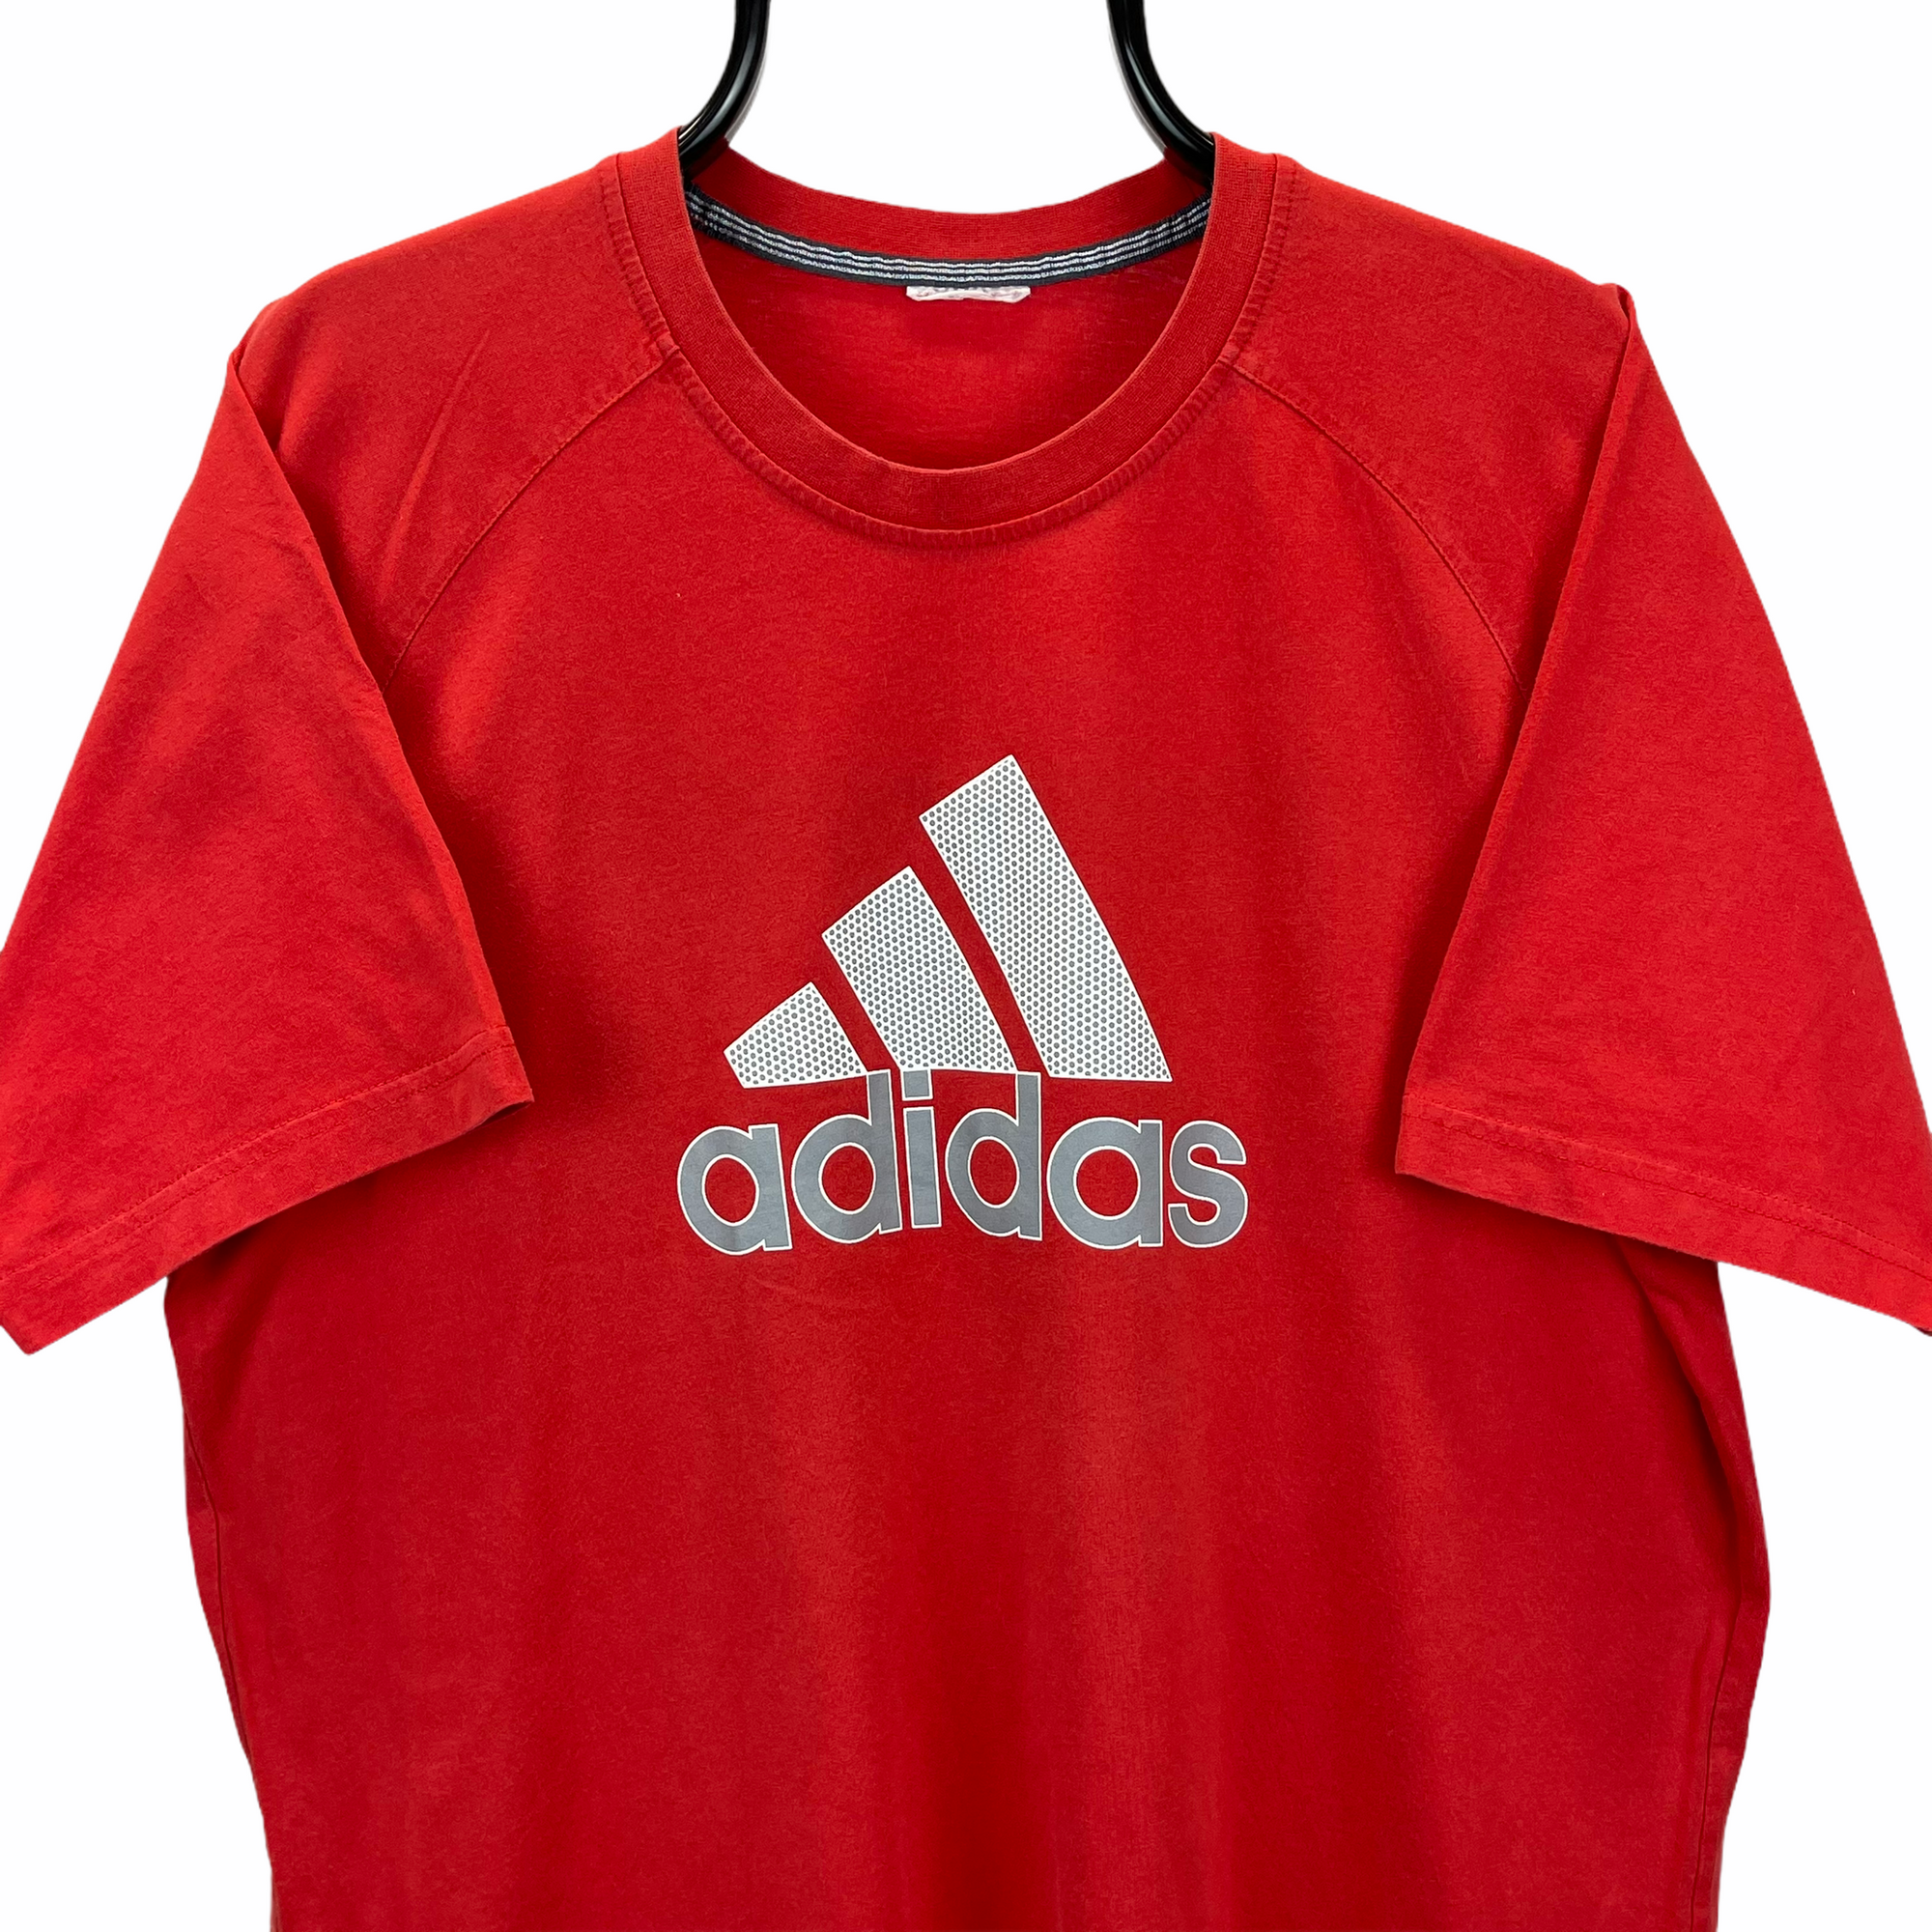 VINTAGE ADIDAS SPELLOUT TEE IN RED - MEN'S LARGE/WOMEN'S XL